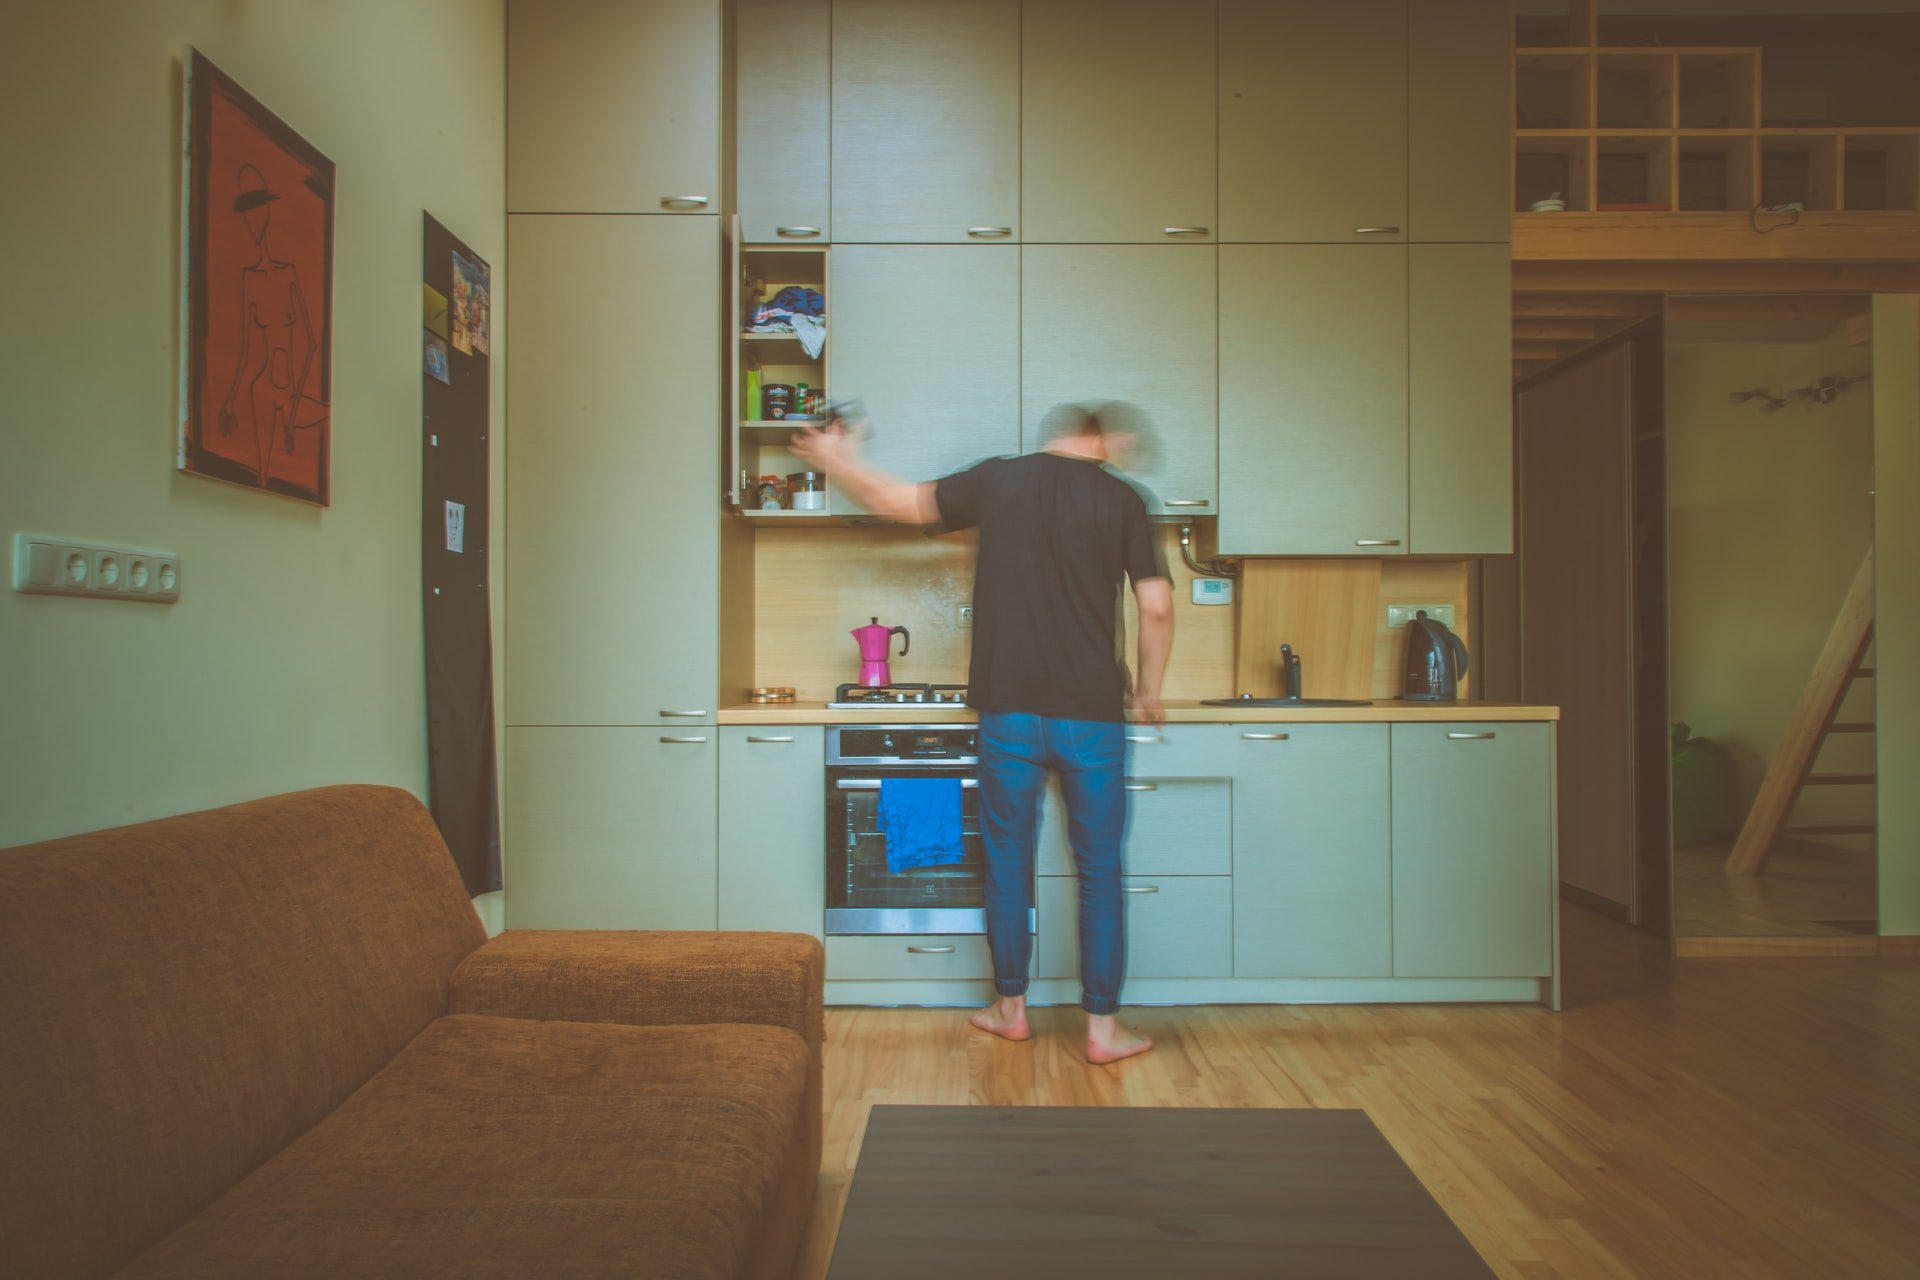 He helped her with the house chores. | Source: Unsplash